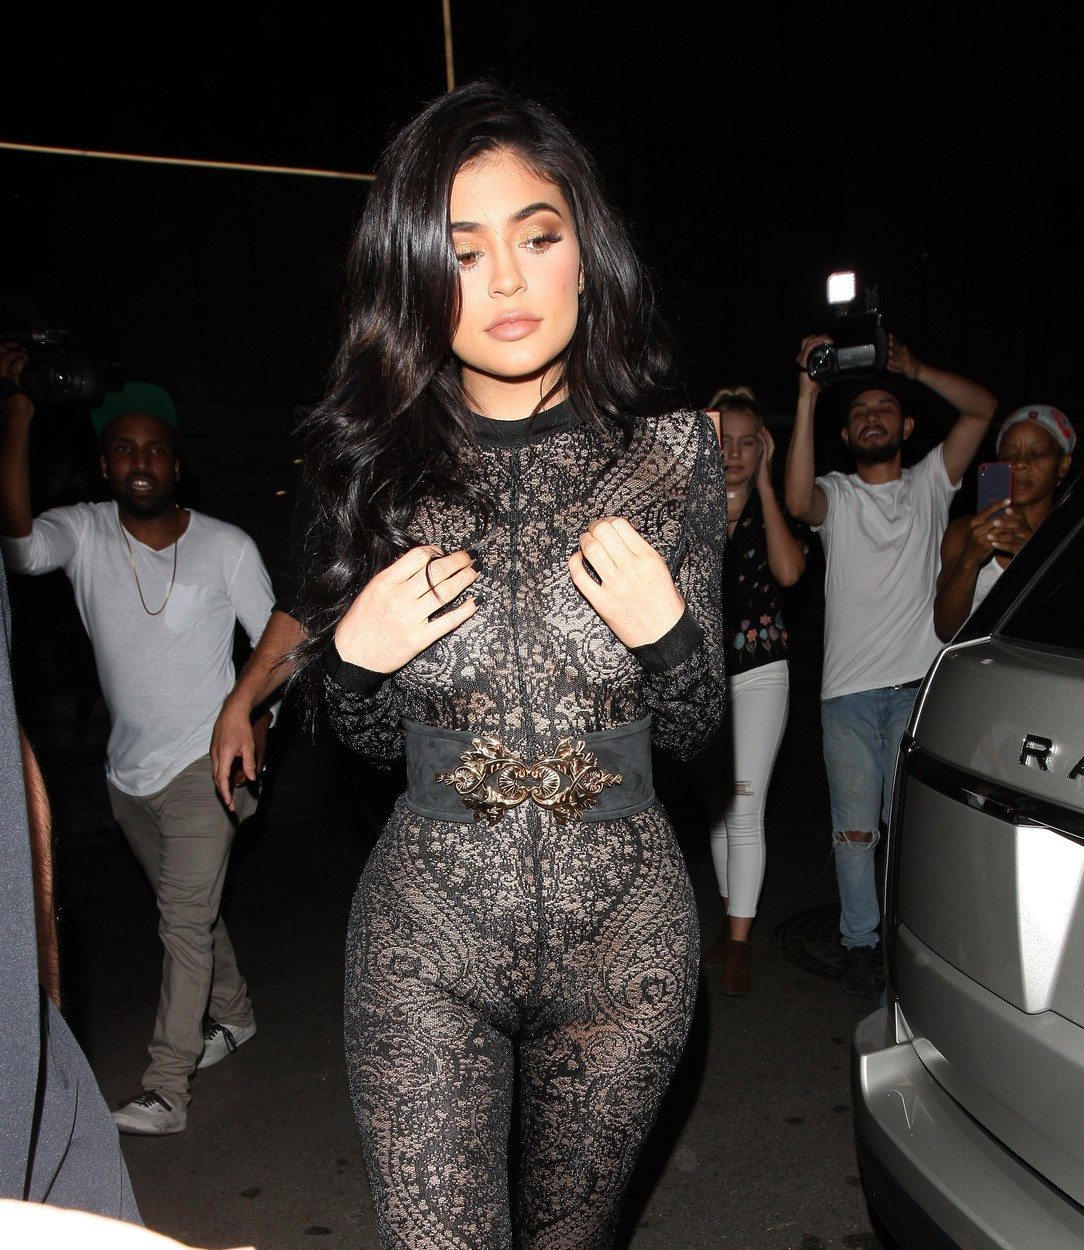 Kylie Jenner's outfits